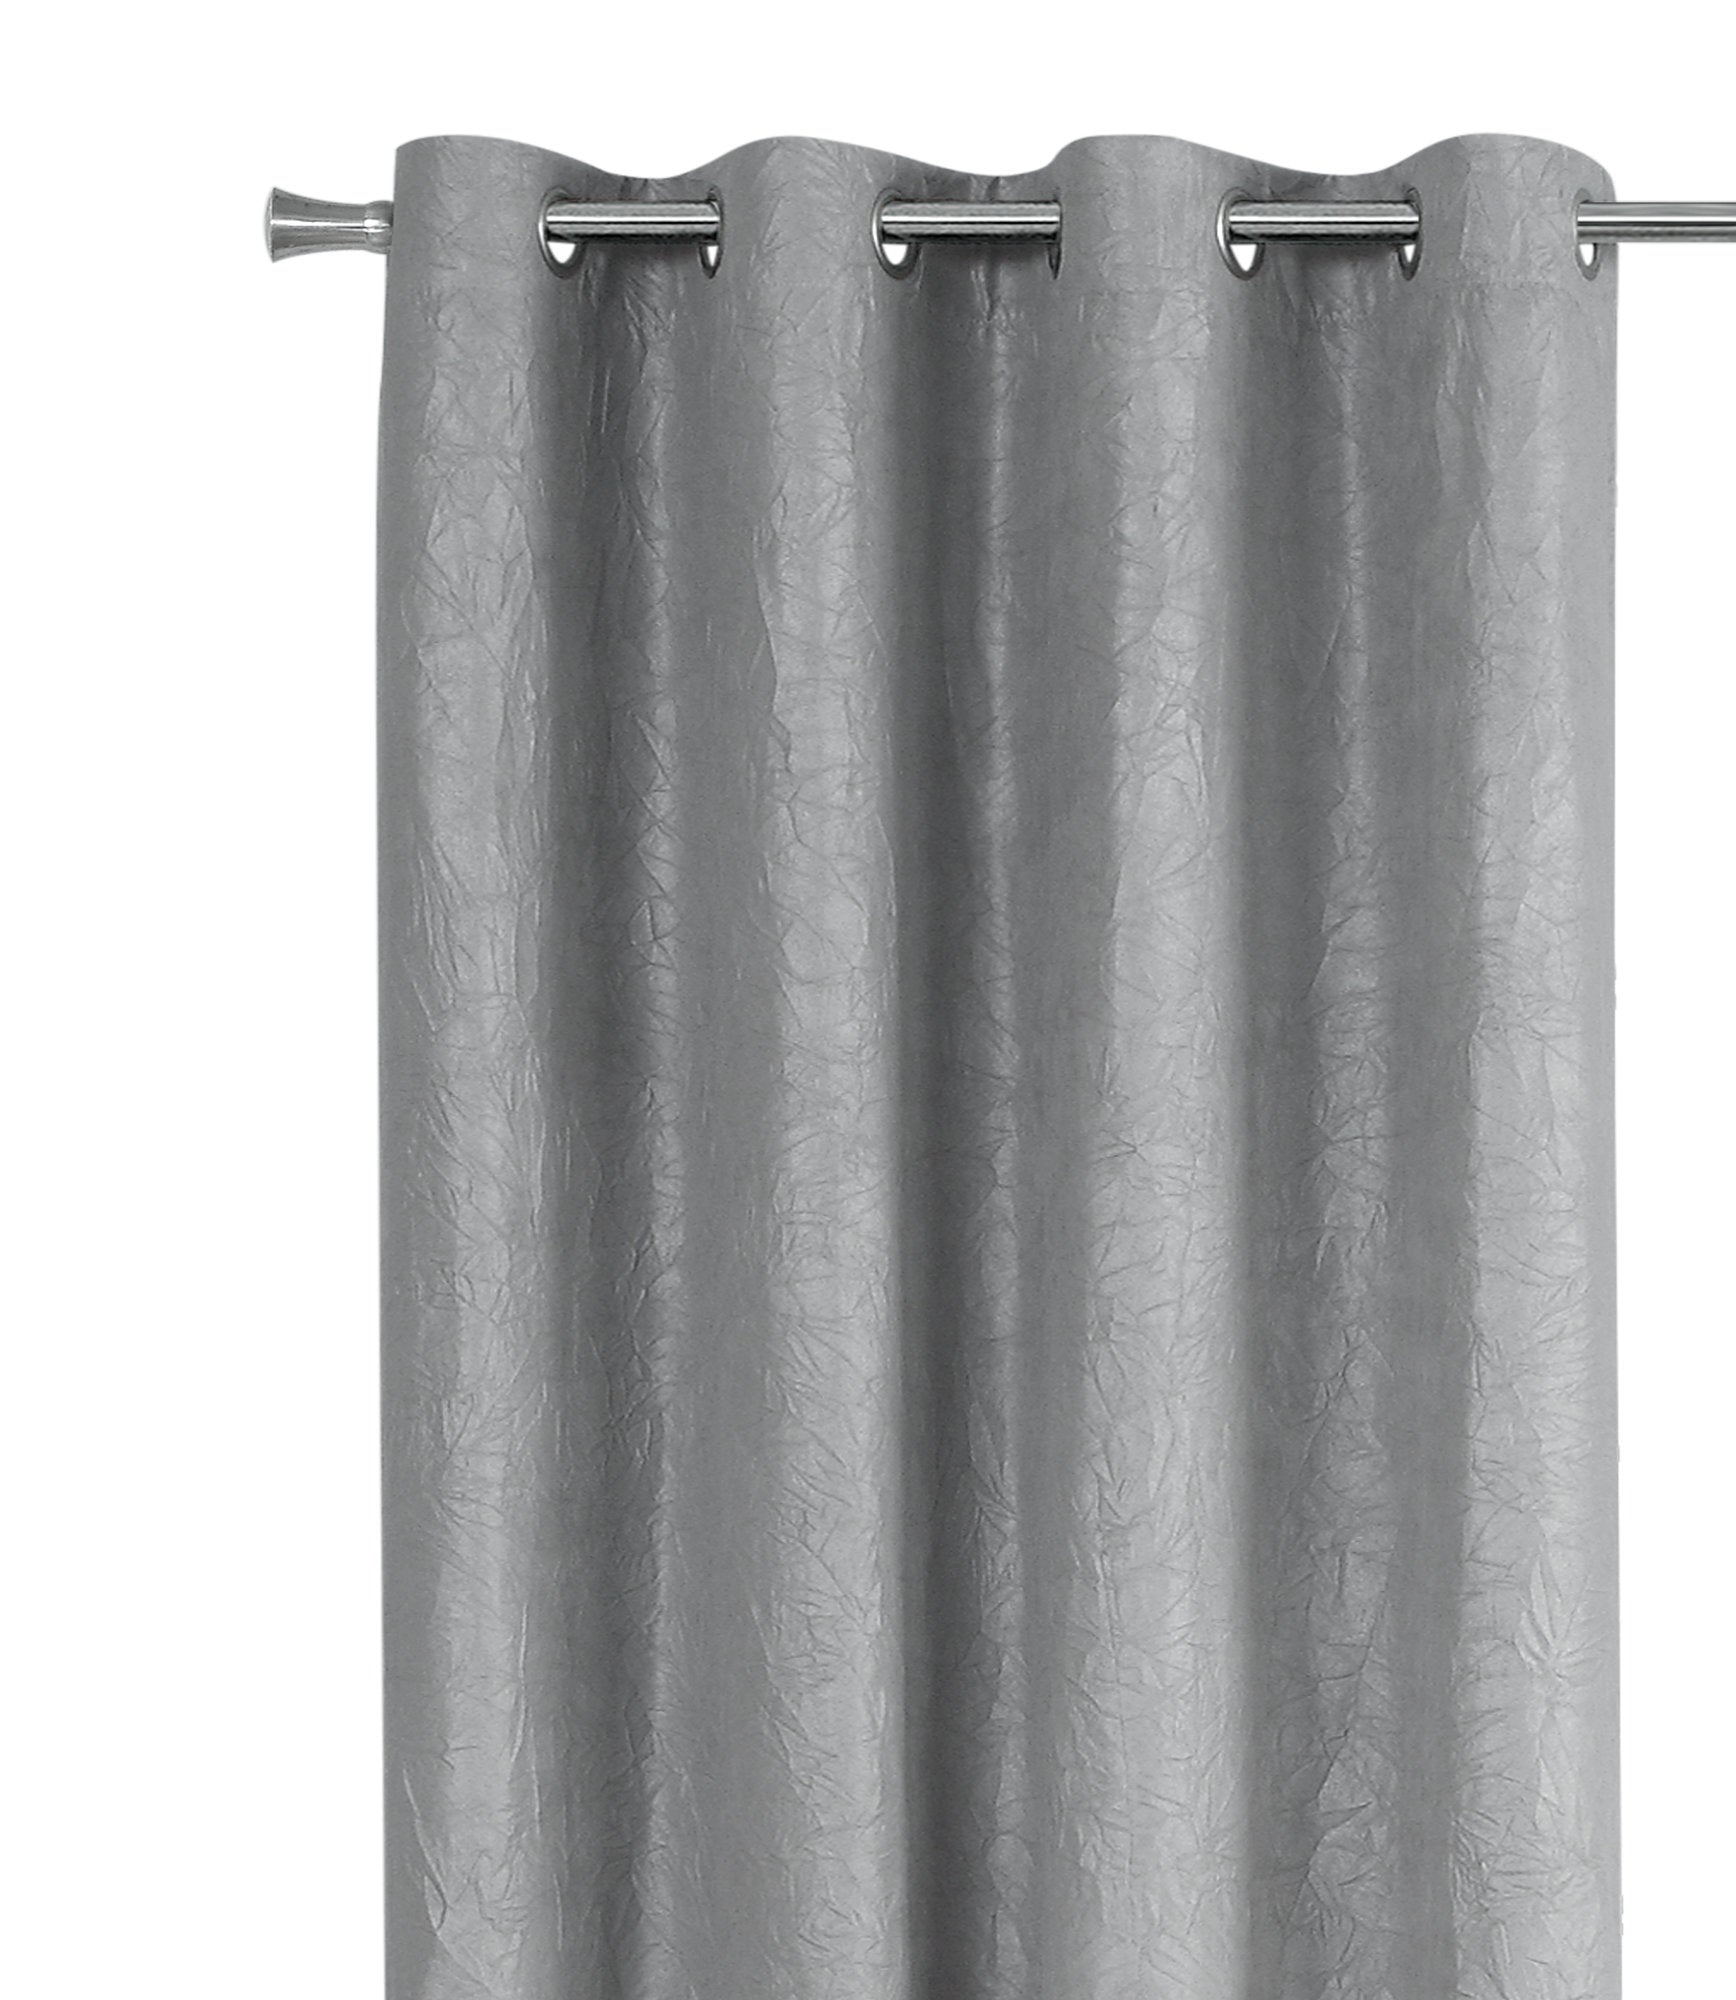 MN-869844    Curtain Panel, 2Pcs Set, 54"W X 84"L, Room Darkening, Grommet, Living Room, Bedroom, Kitchen, Micro Suede, Wrinkled  Finish, Polyester Room Darkening Fabric, Grey, Contemporary, Modern